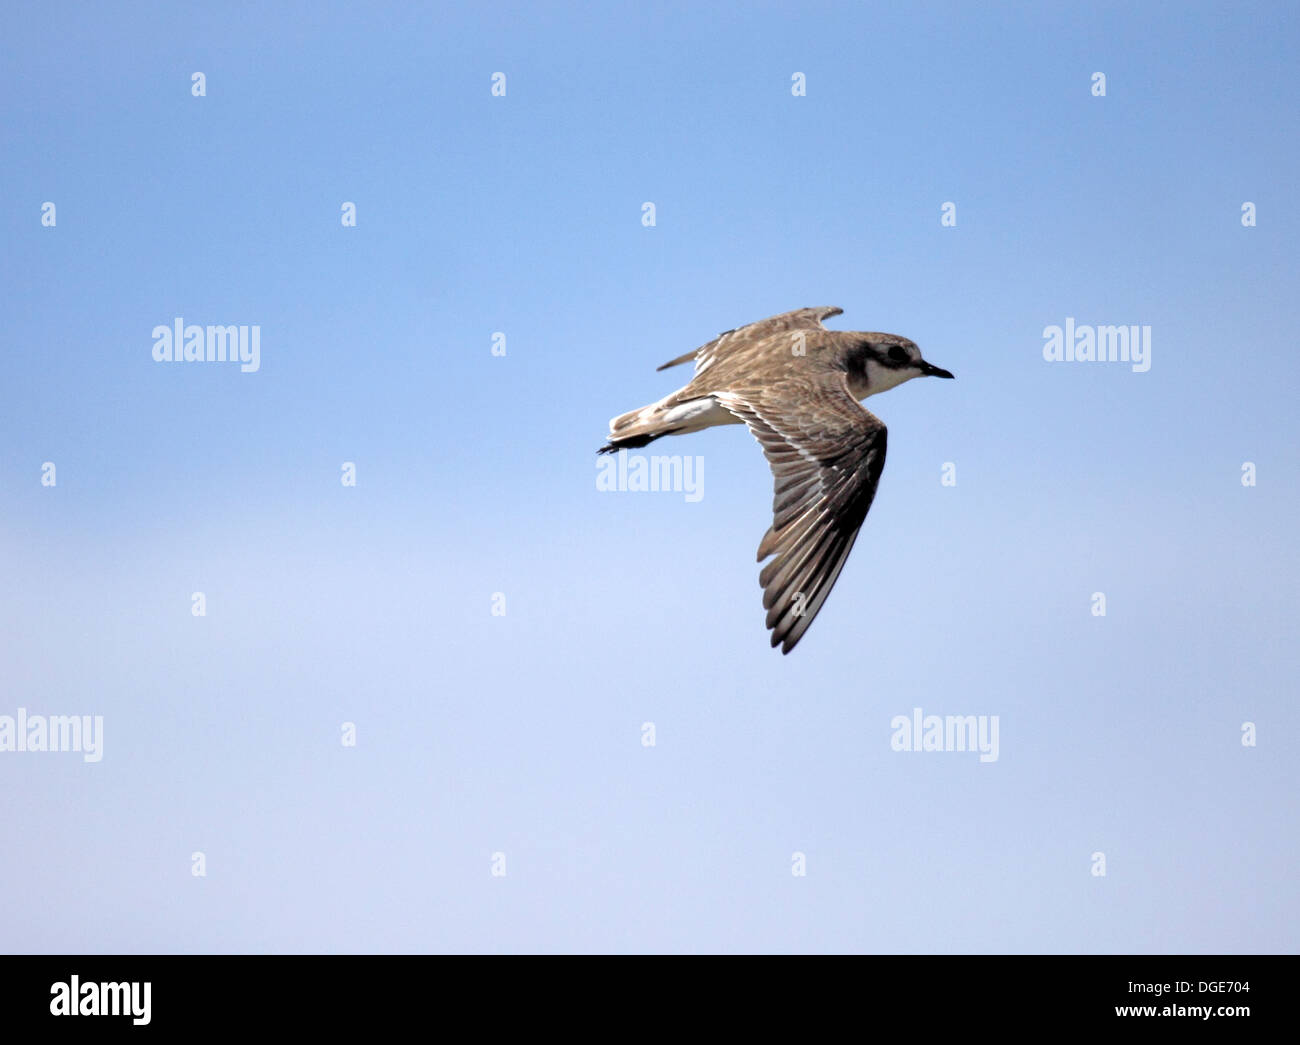 Greater sandplover on island in The Seychelles Stock Photo